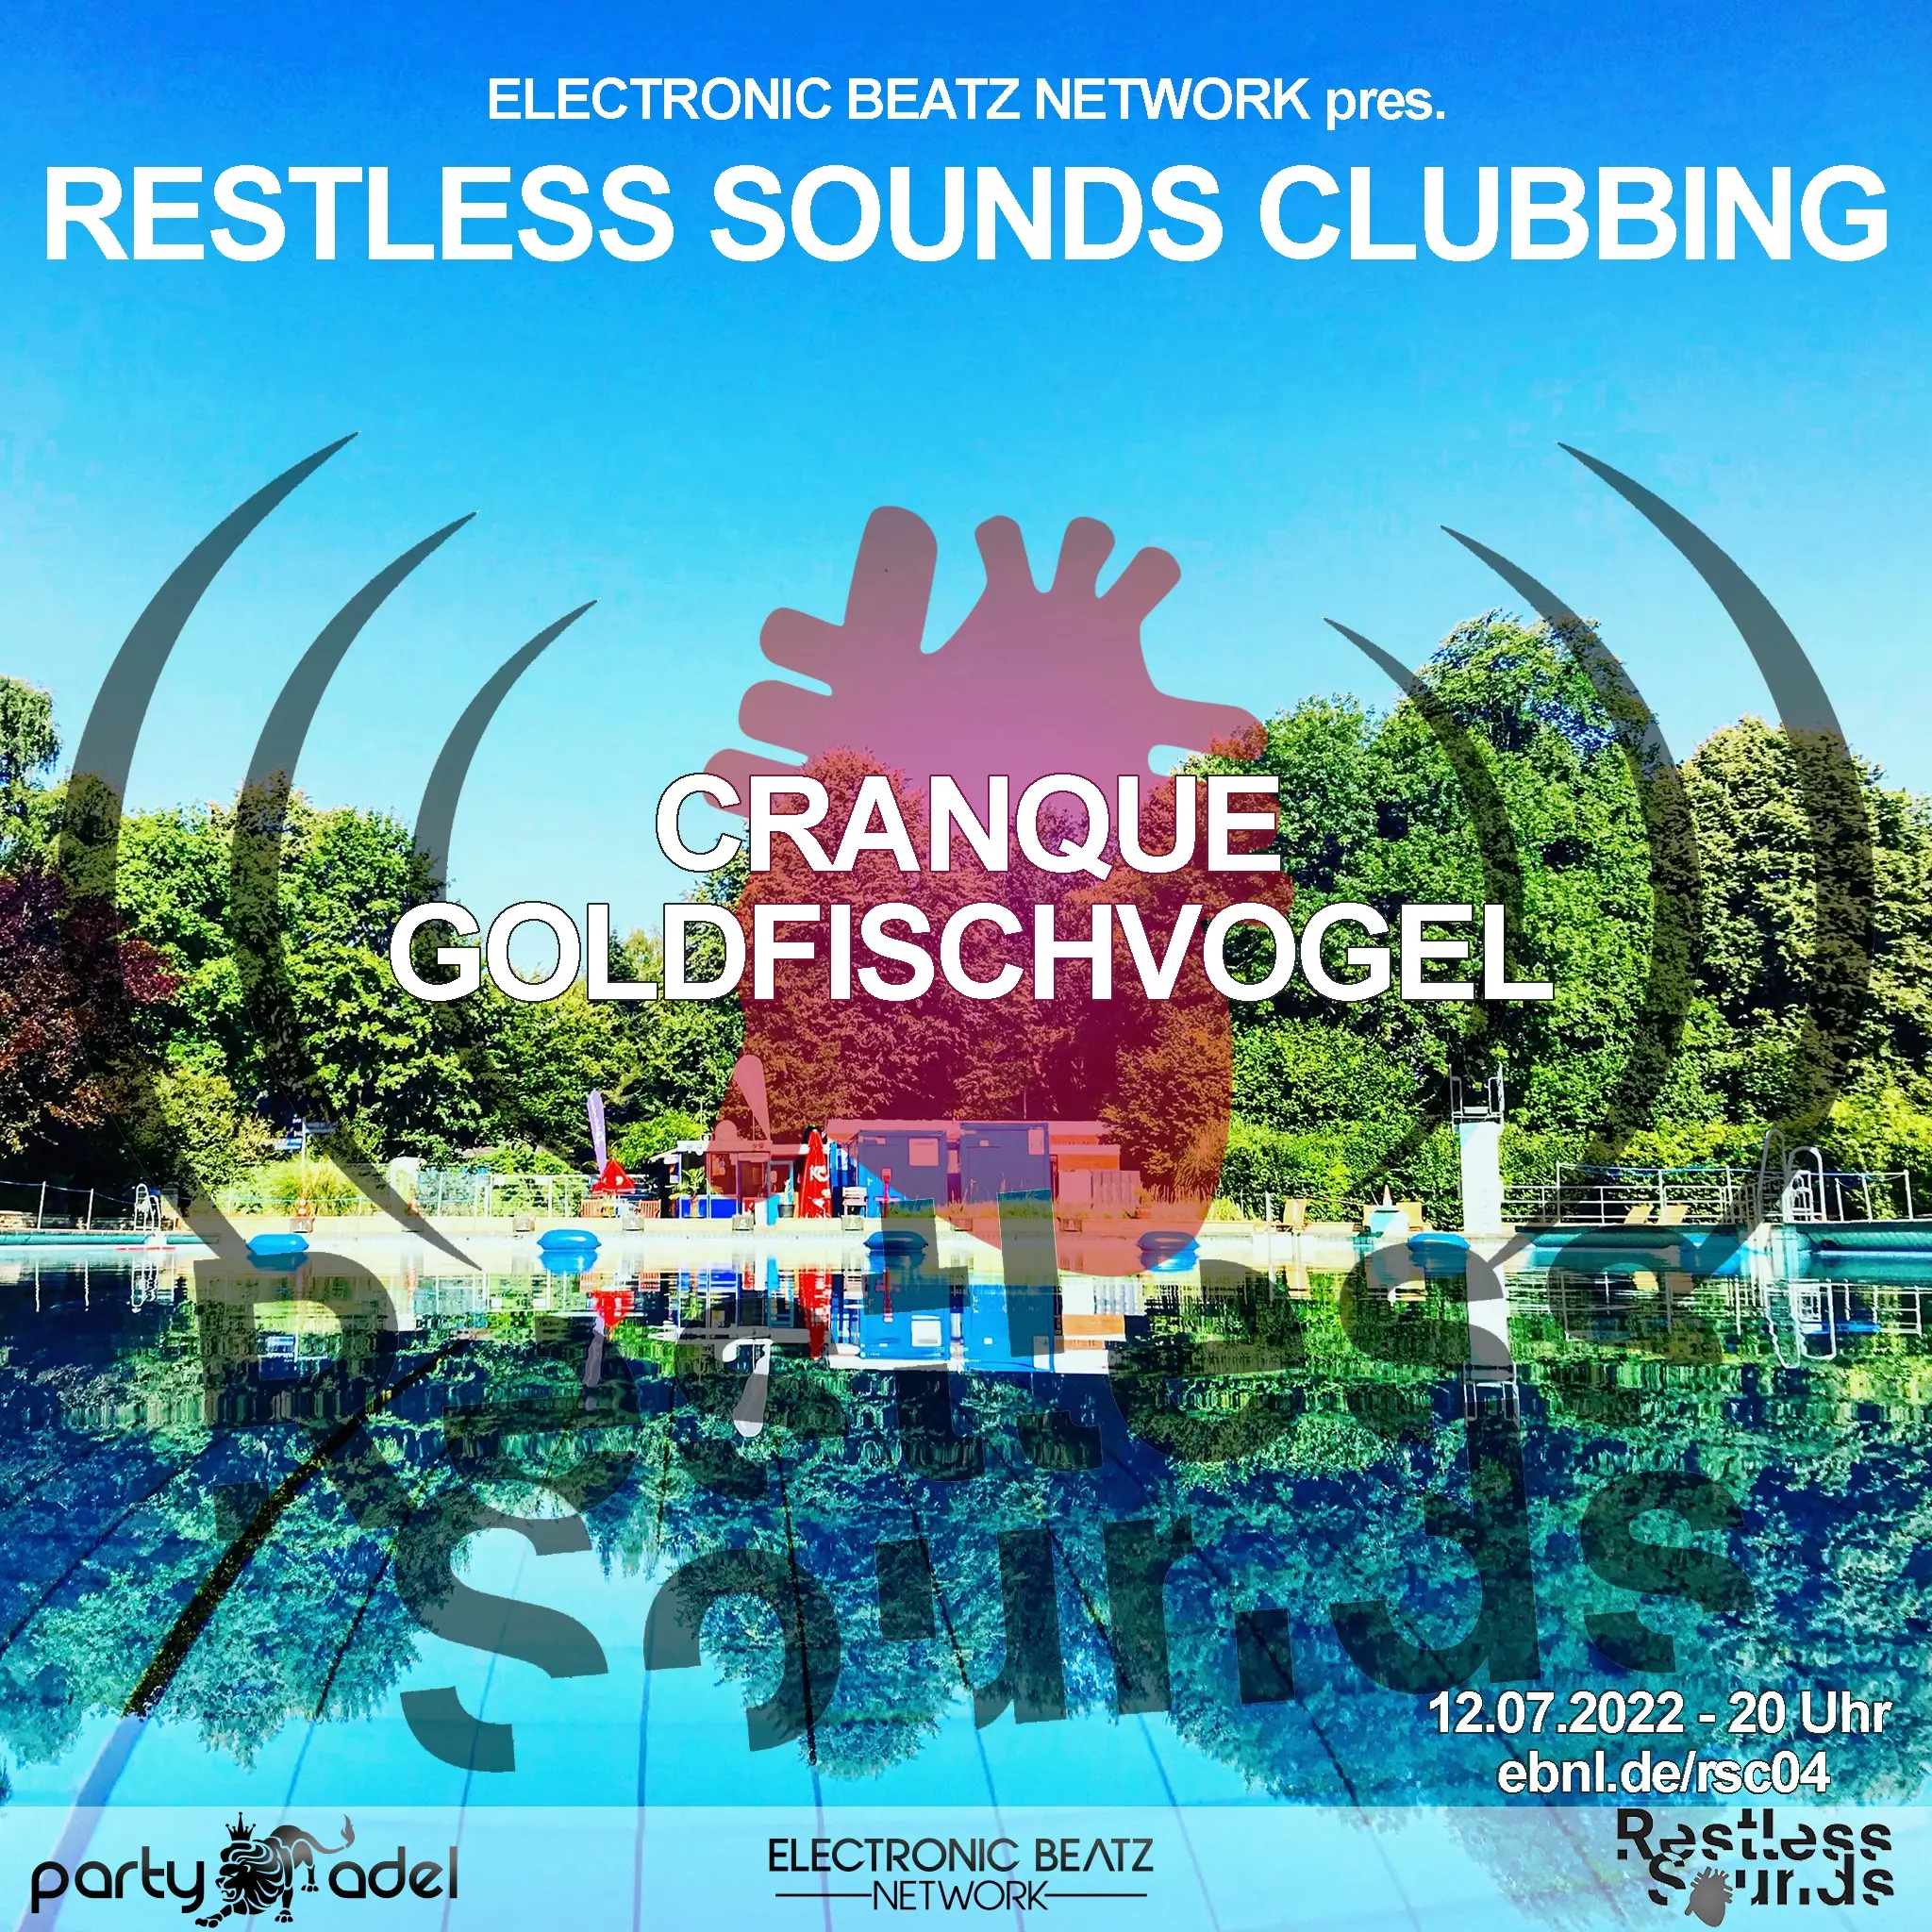  Restless Sounds Clubbing (12.07.2022)